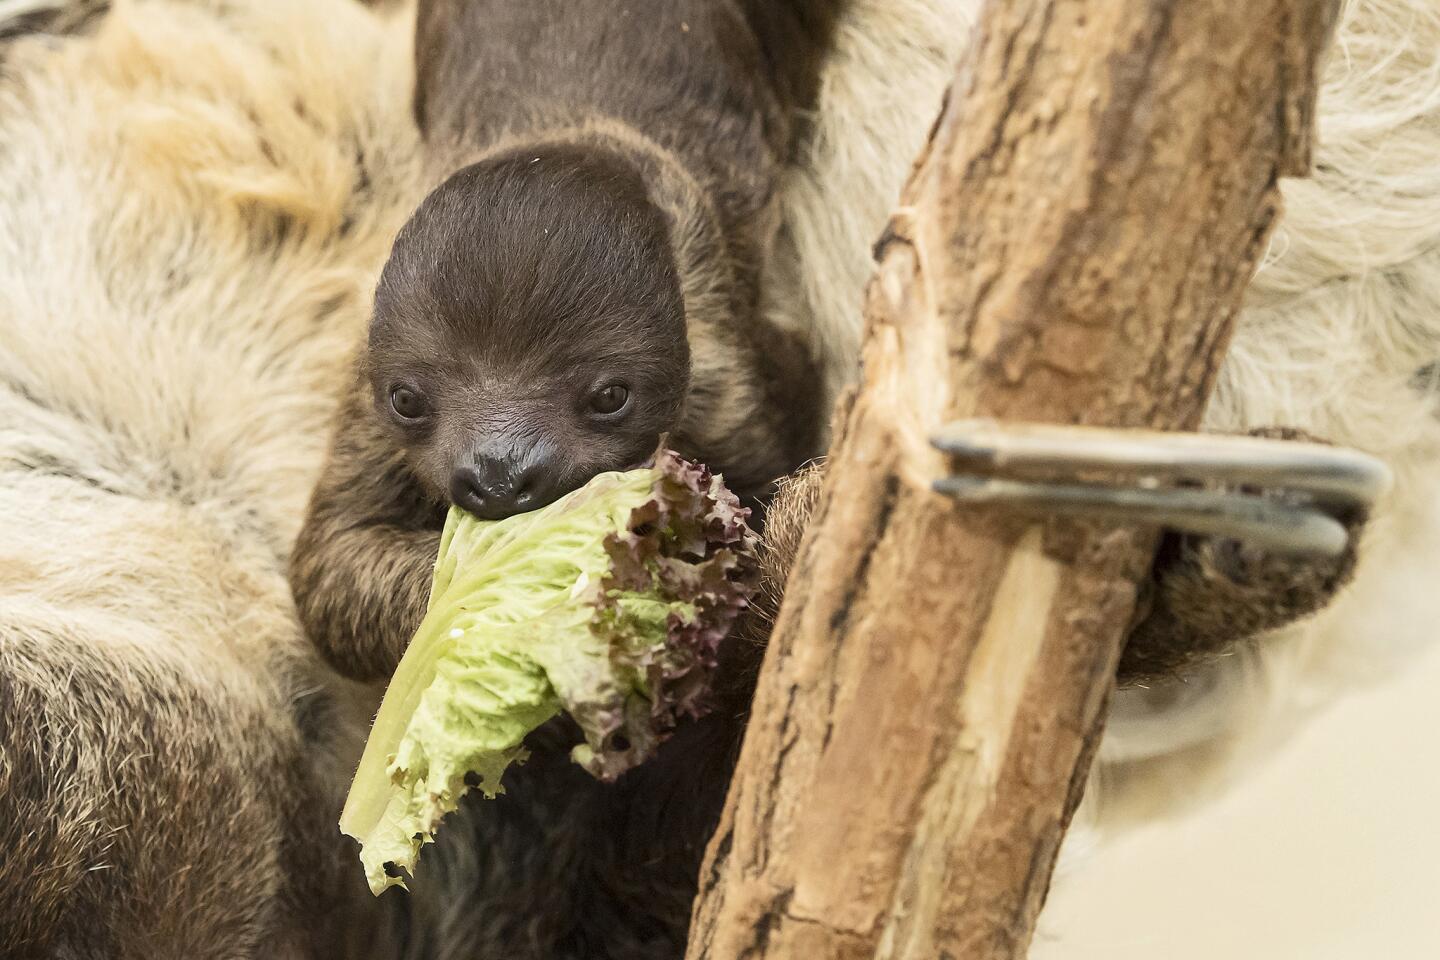 A baby sloth eats some lettuce as it hangs on its mother's belly in their enclosure at the Tiergarten Schoenbrunn zoo in Vienna, Austria, on Dec. 13, 2016. The baby was born Nov. 18, but it just recently emerged after spending its early weeks hidden in its mother's soft coat.